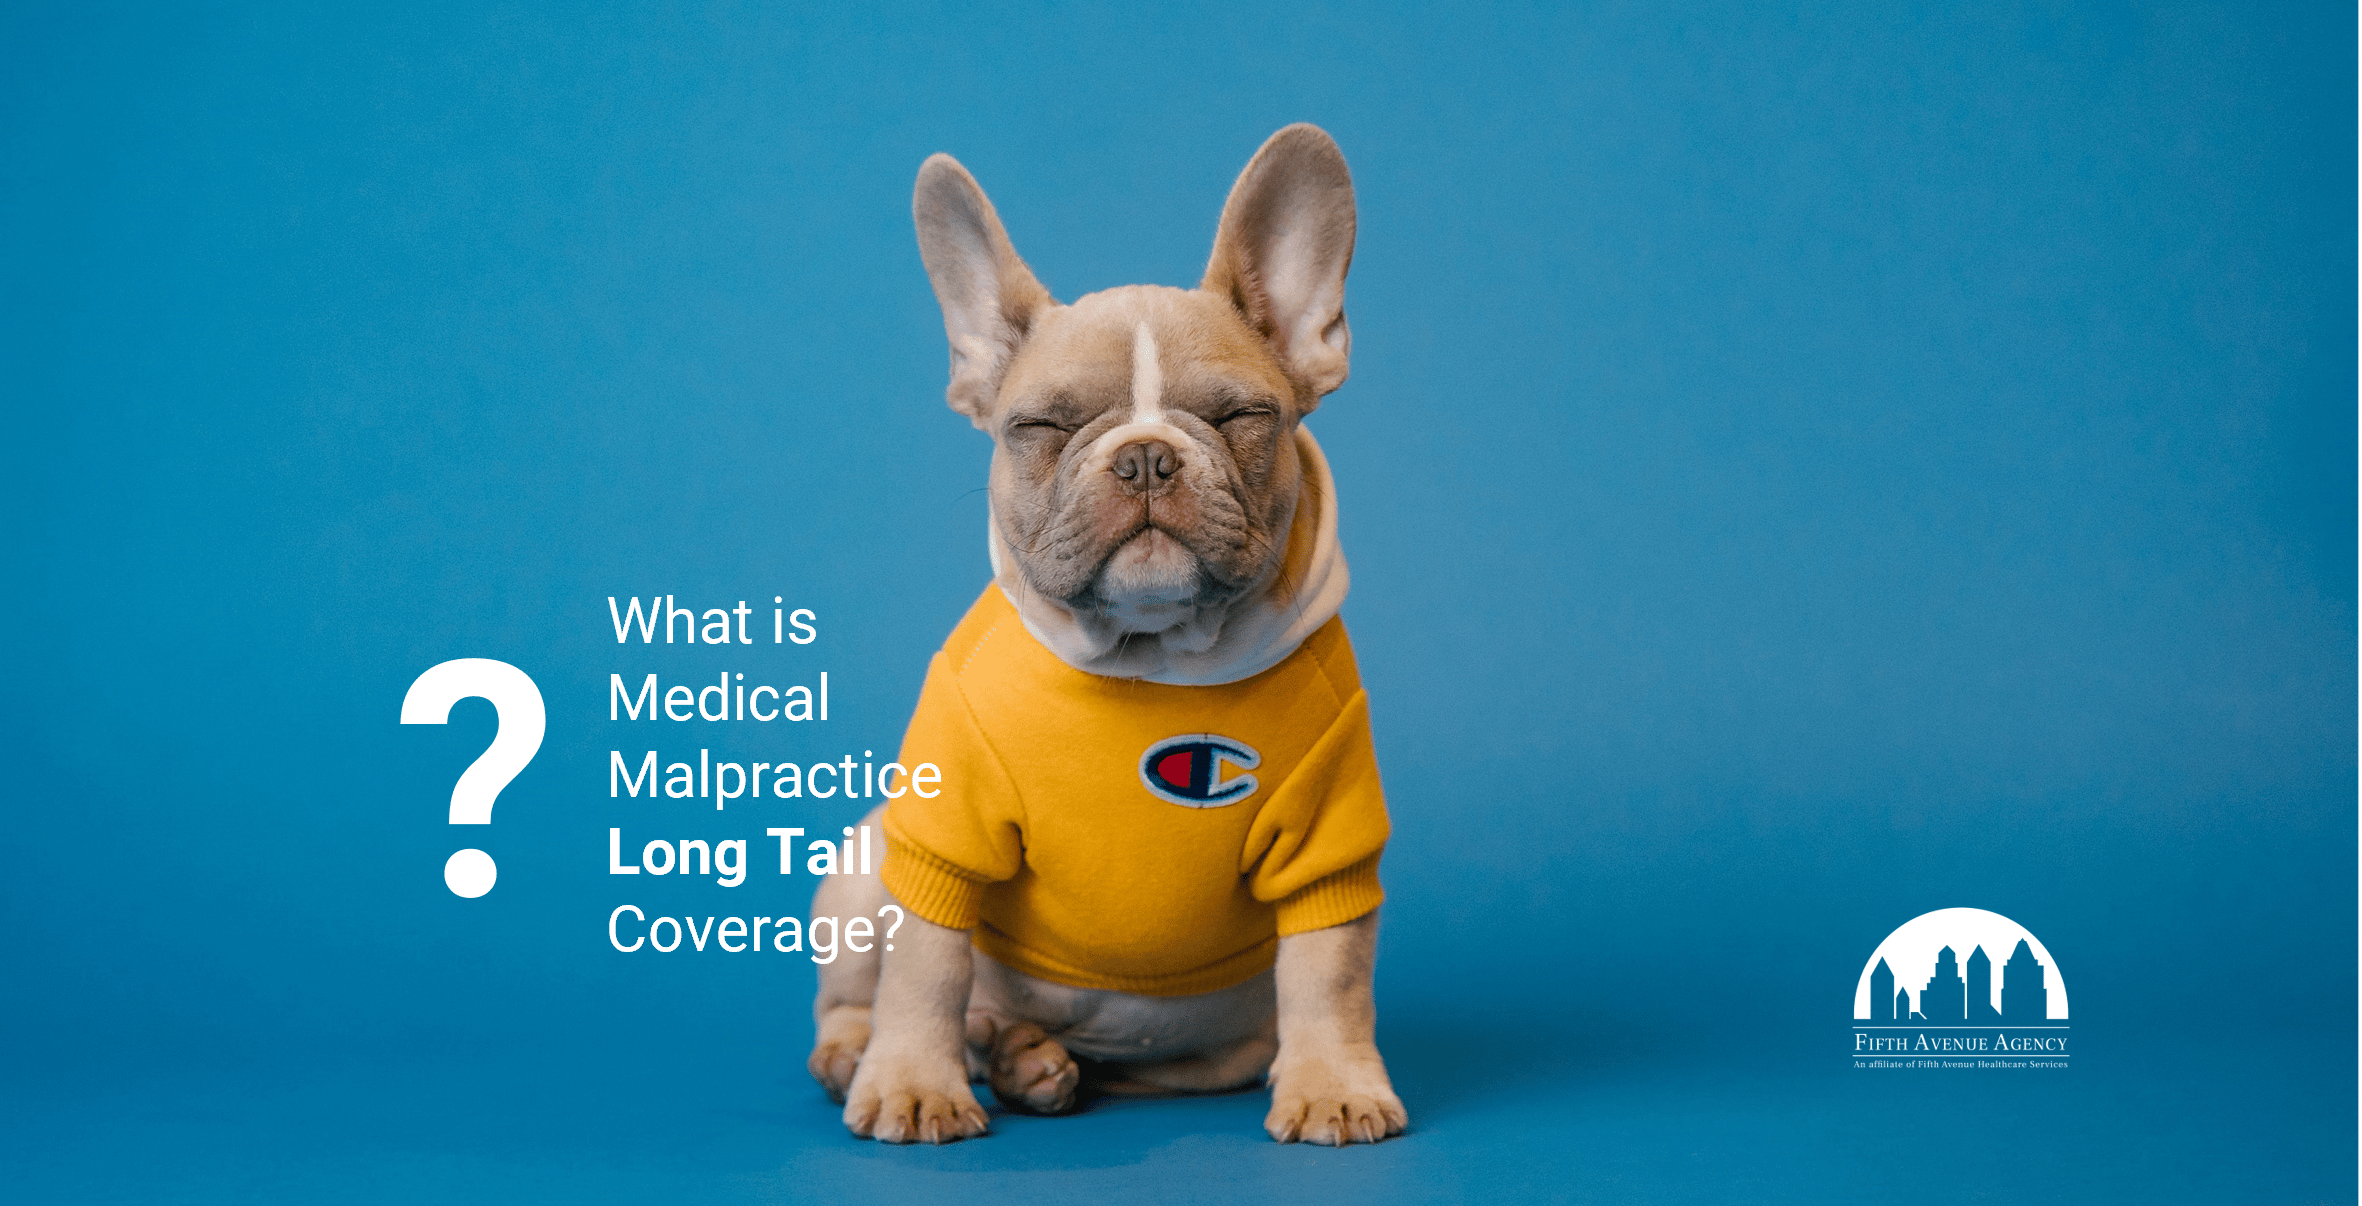 Medical Malpractice Long Tail Coverage